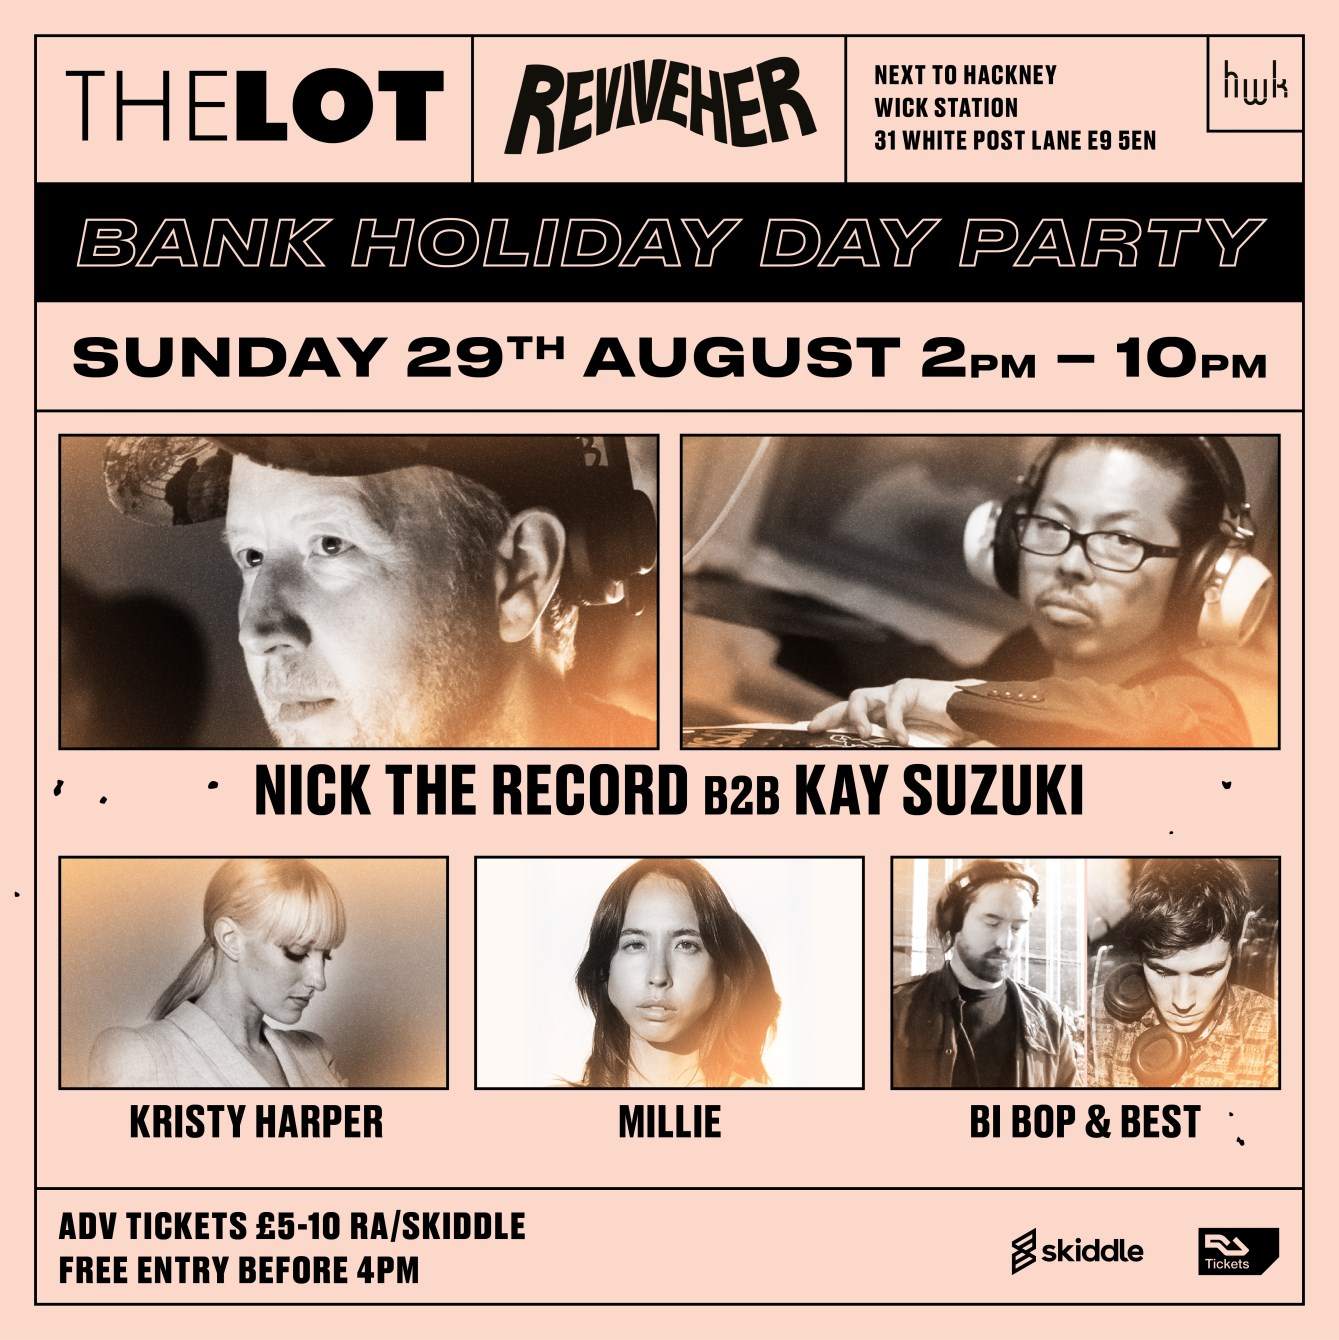 REVIVEHER Bank Holiday Day Party - Nick The Record B2B Kay Suzuki, Kristy Harper & Millie - Página frontal